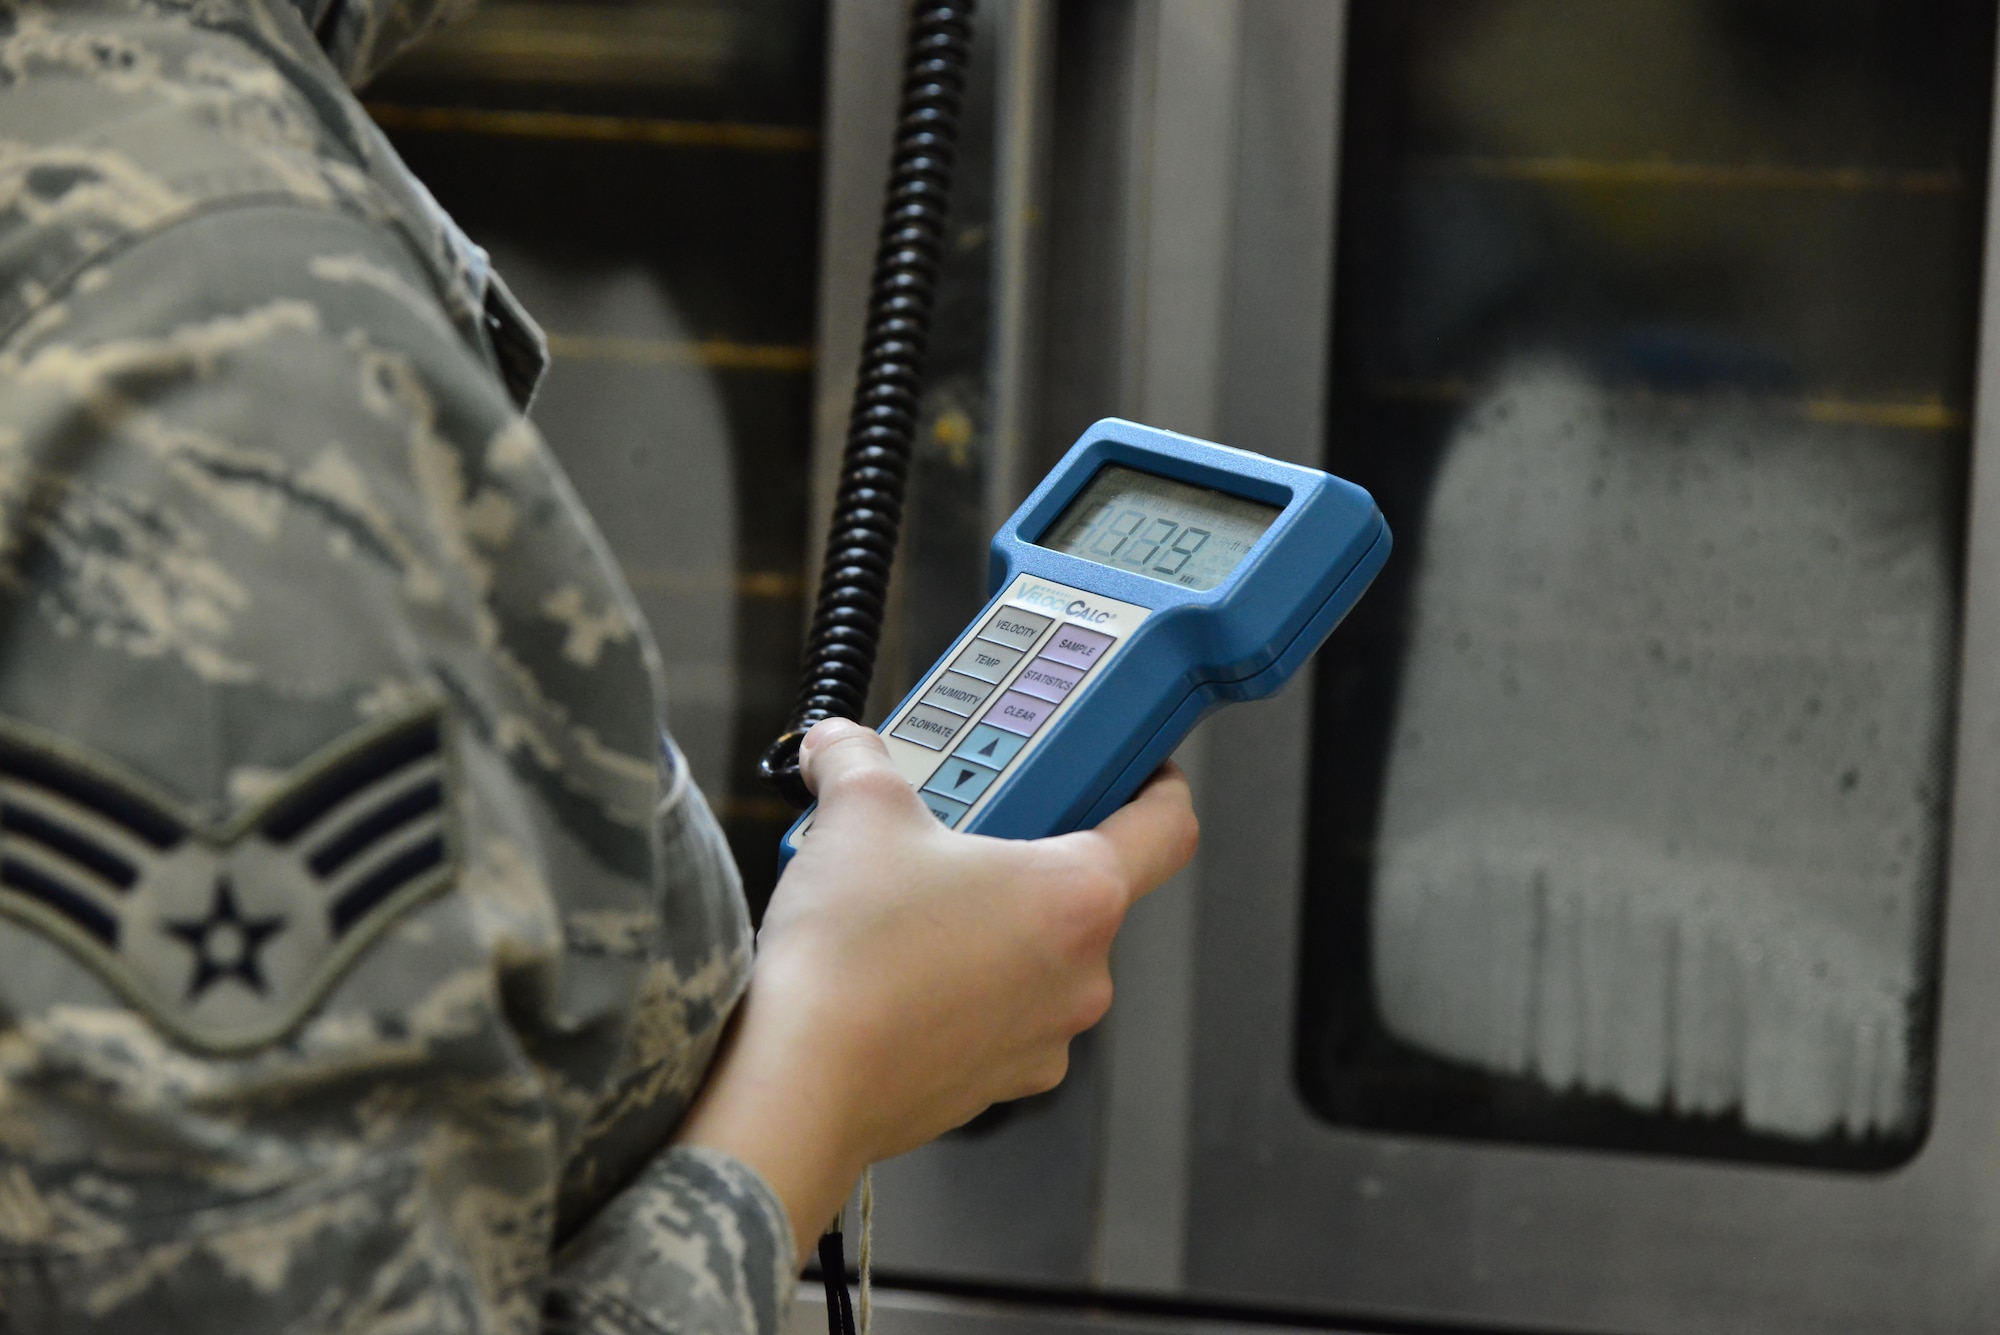 Senior Airman Leah Smith, 379th Expeditionary Medical Operations Support Squadron Bioenvironmental, uses a Direct-Reading instrument to measure the flow rate of air that is being passed through the dining facility ventilation system September 30, 2015 at Al Udeid Air Base, Qatar. (U.S. Air Force photo/Staff Sgt. Alexandre Montes)